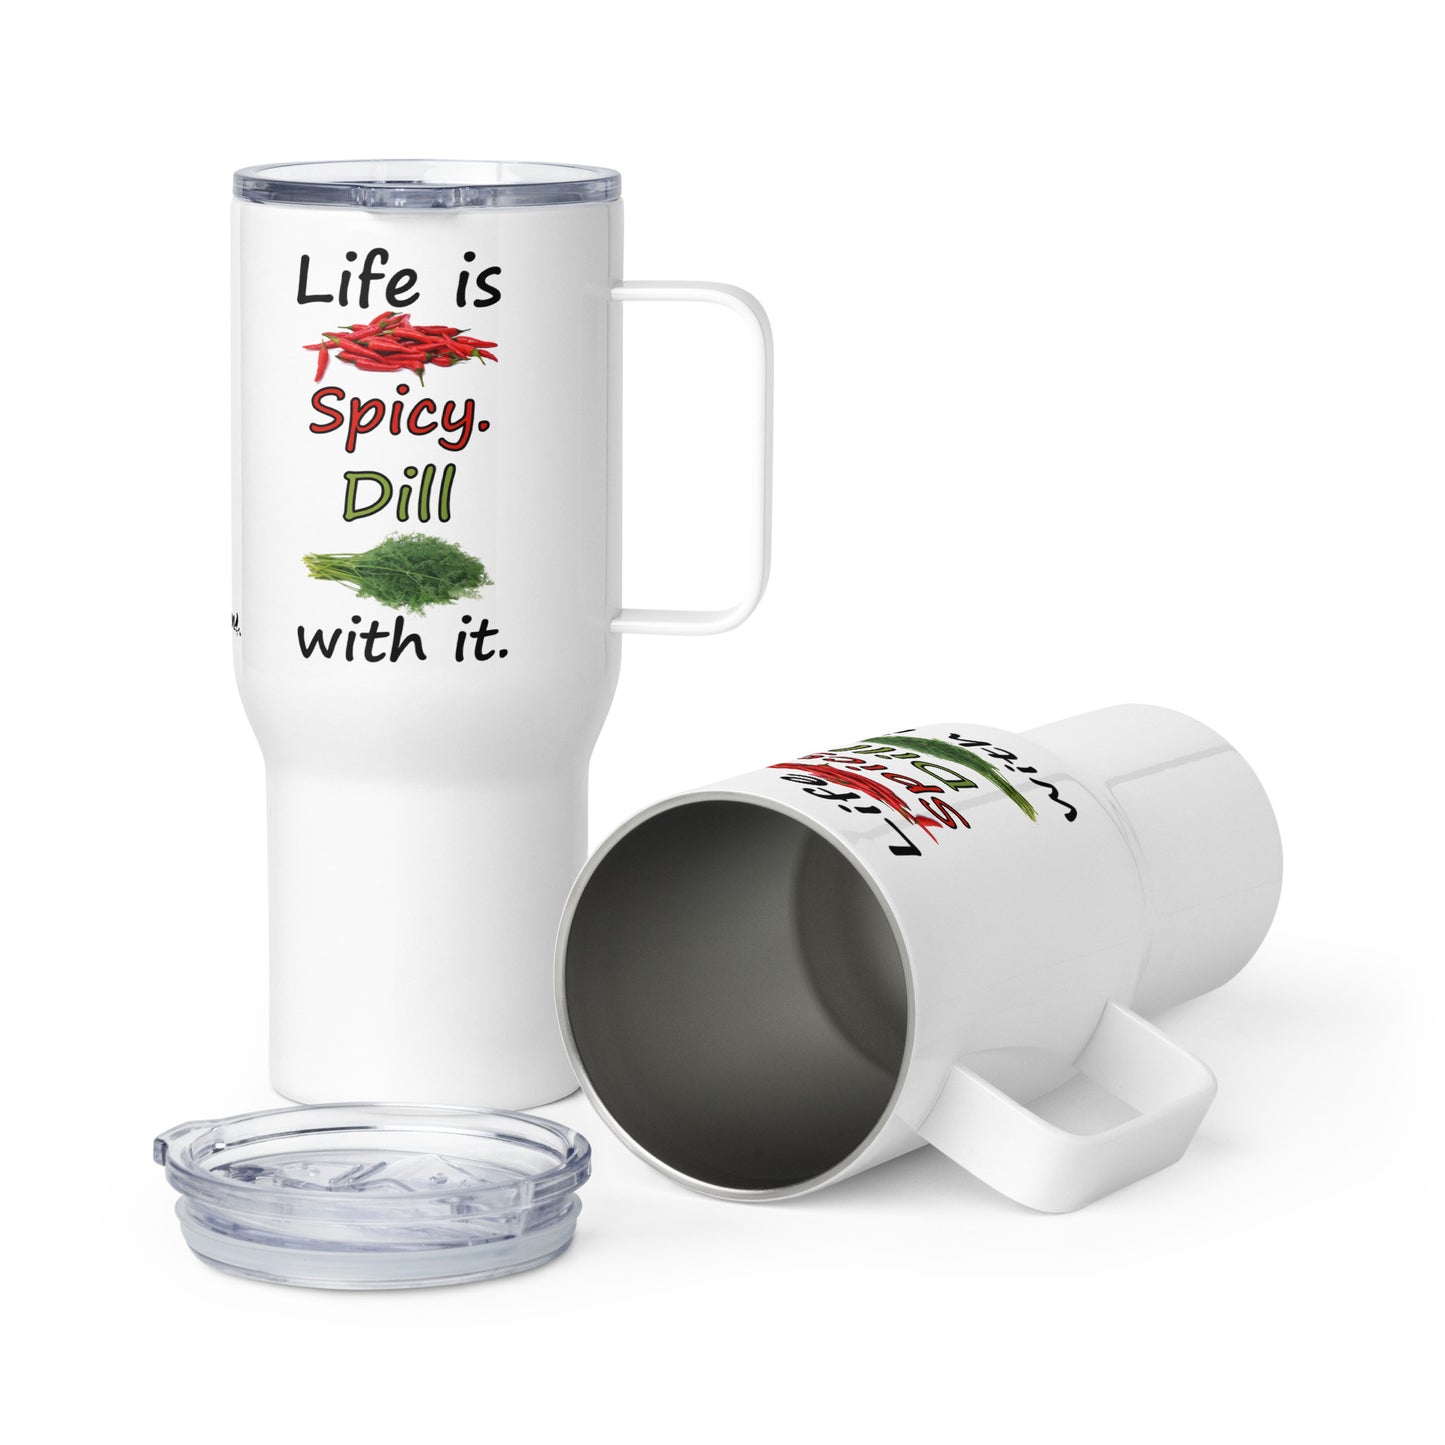 Stainless steel travel mug with handle. Holds 25 ounces of hot or cold liquids. Fits most car cup holders. Features double-sided phrase: Life is spicy. Dill with it, and accompanying chili pepper and dill weed images. Comes with spill proof plastic lid.